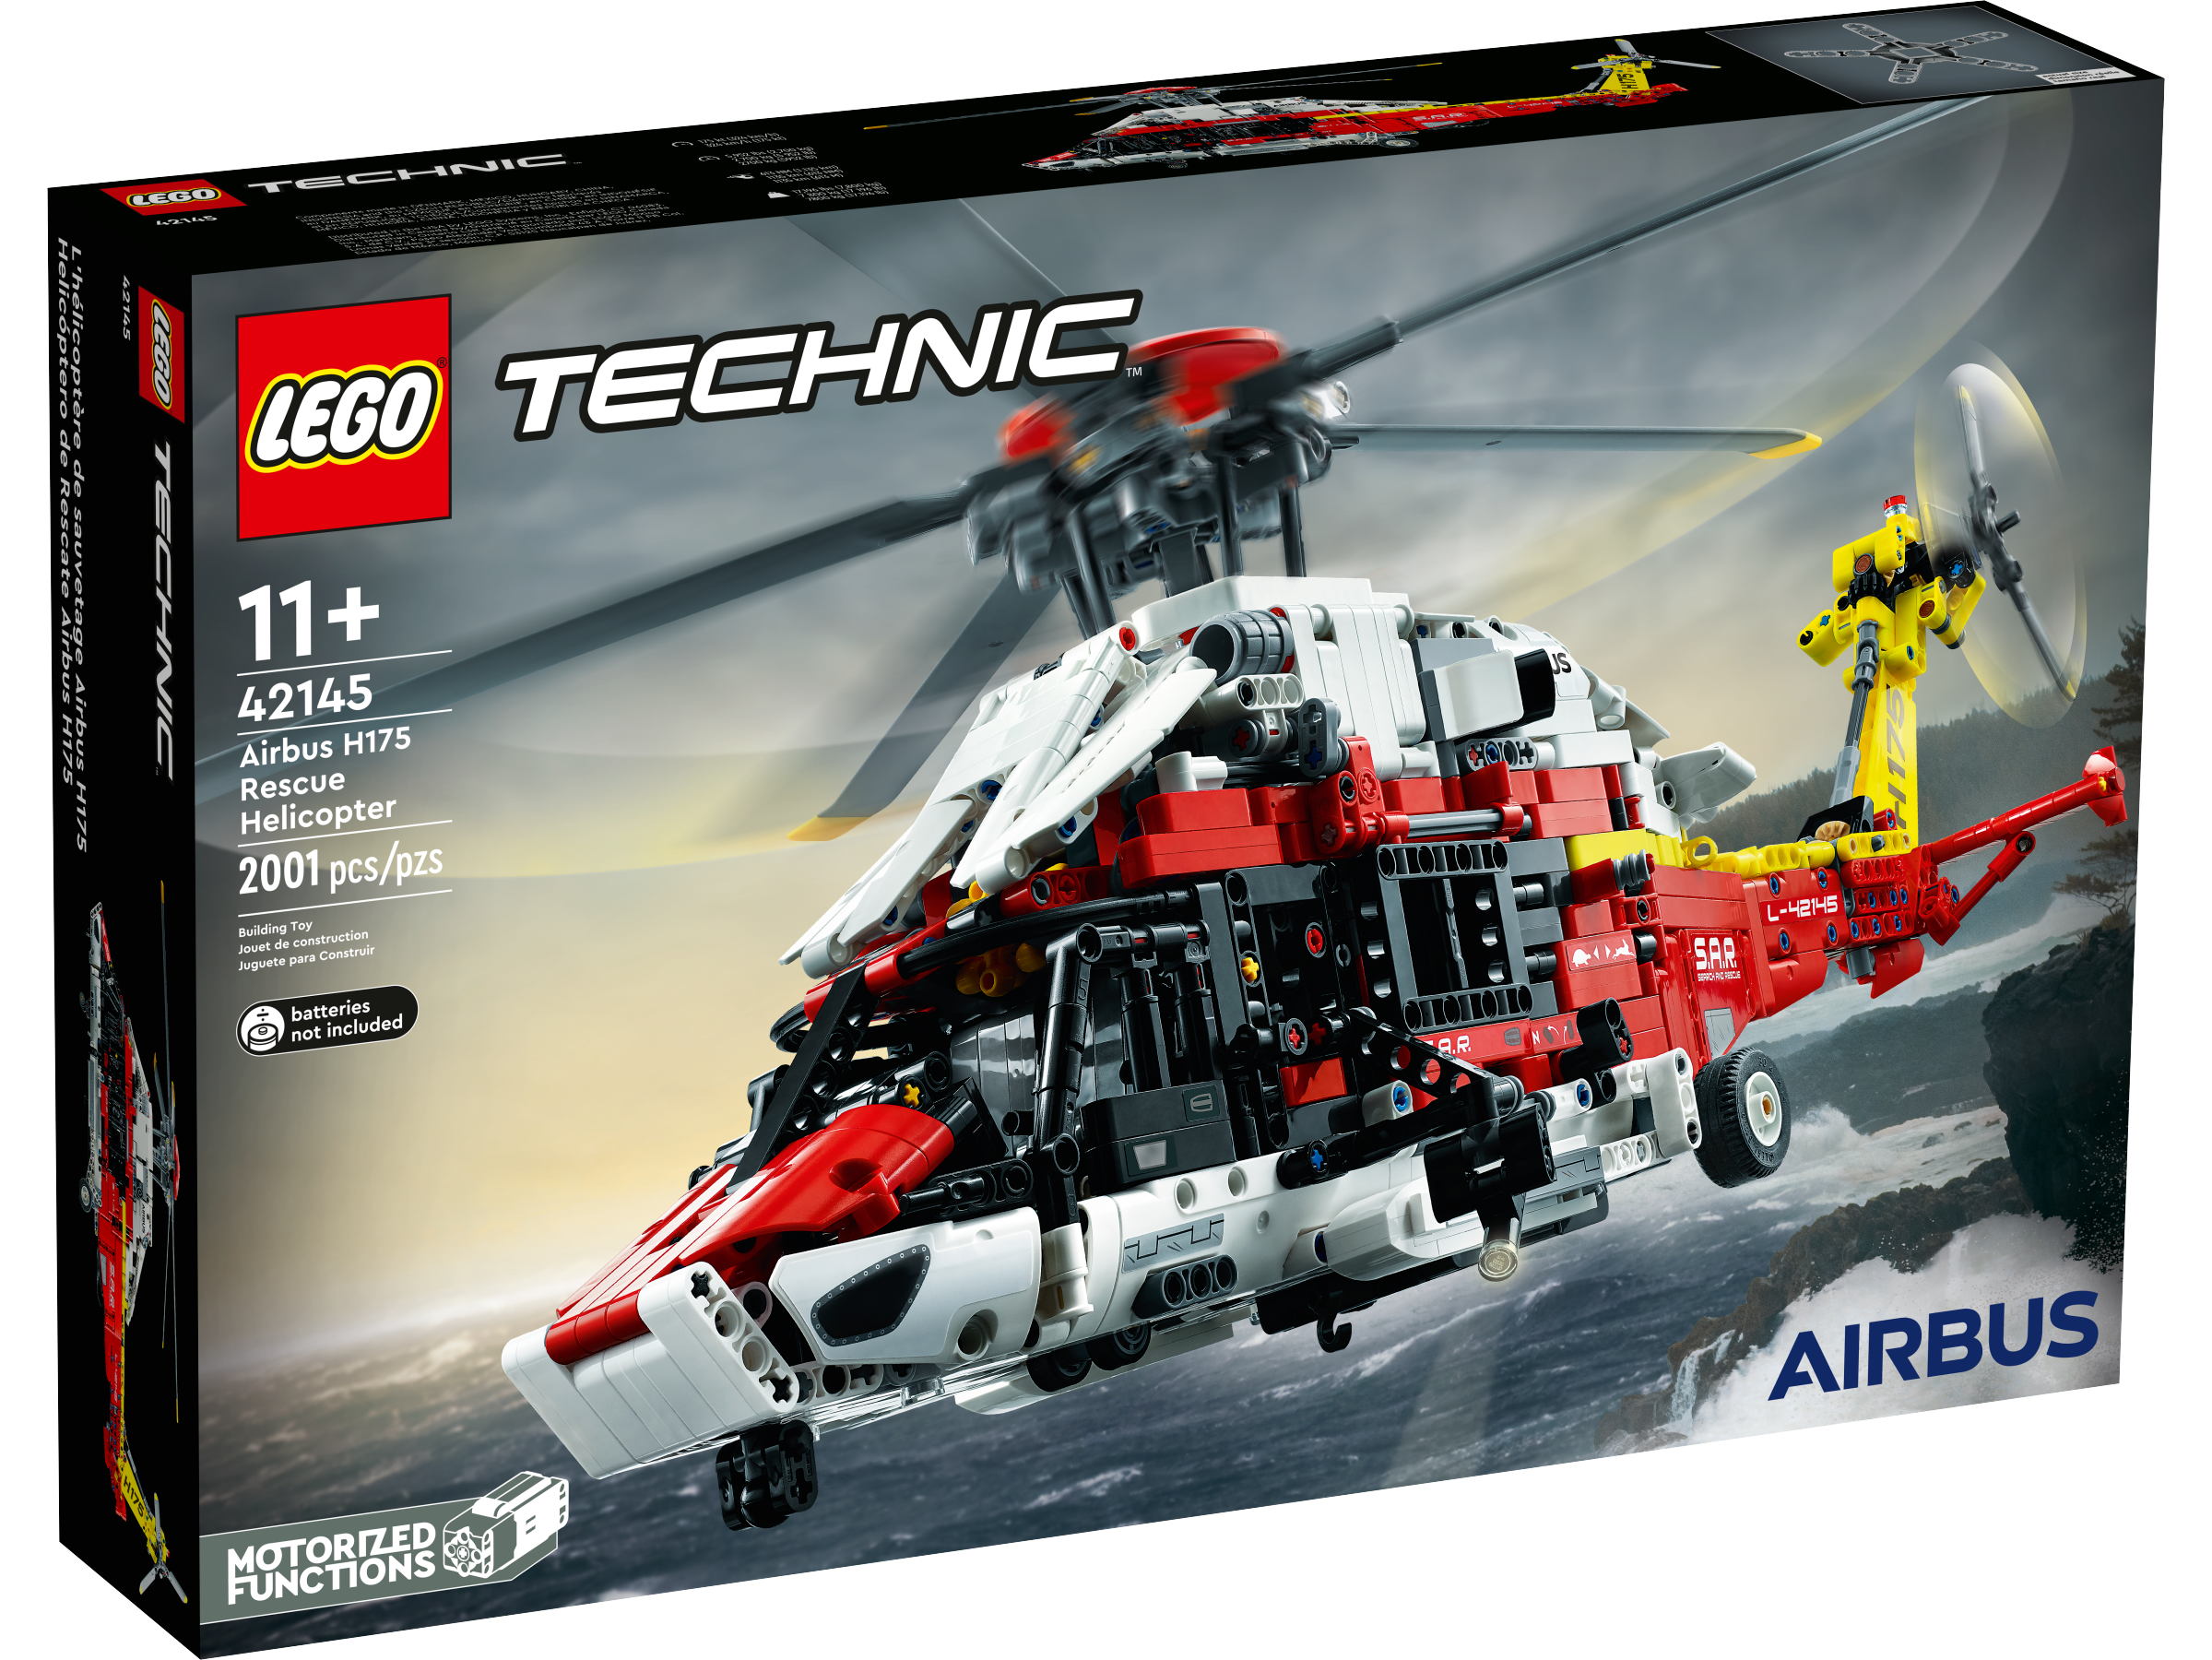 LEGO® Technic® Airbus H175 Rescue Helicopter 42145 Model Building Kit (2,001 Pieces)